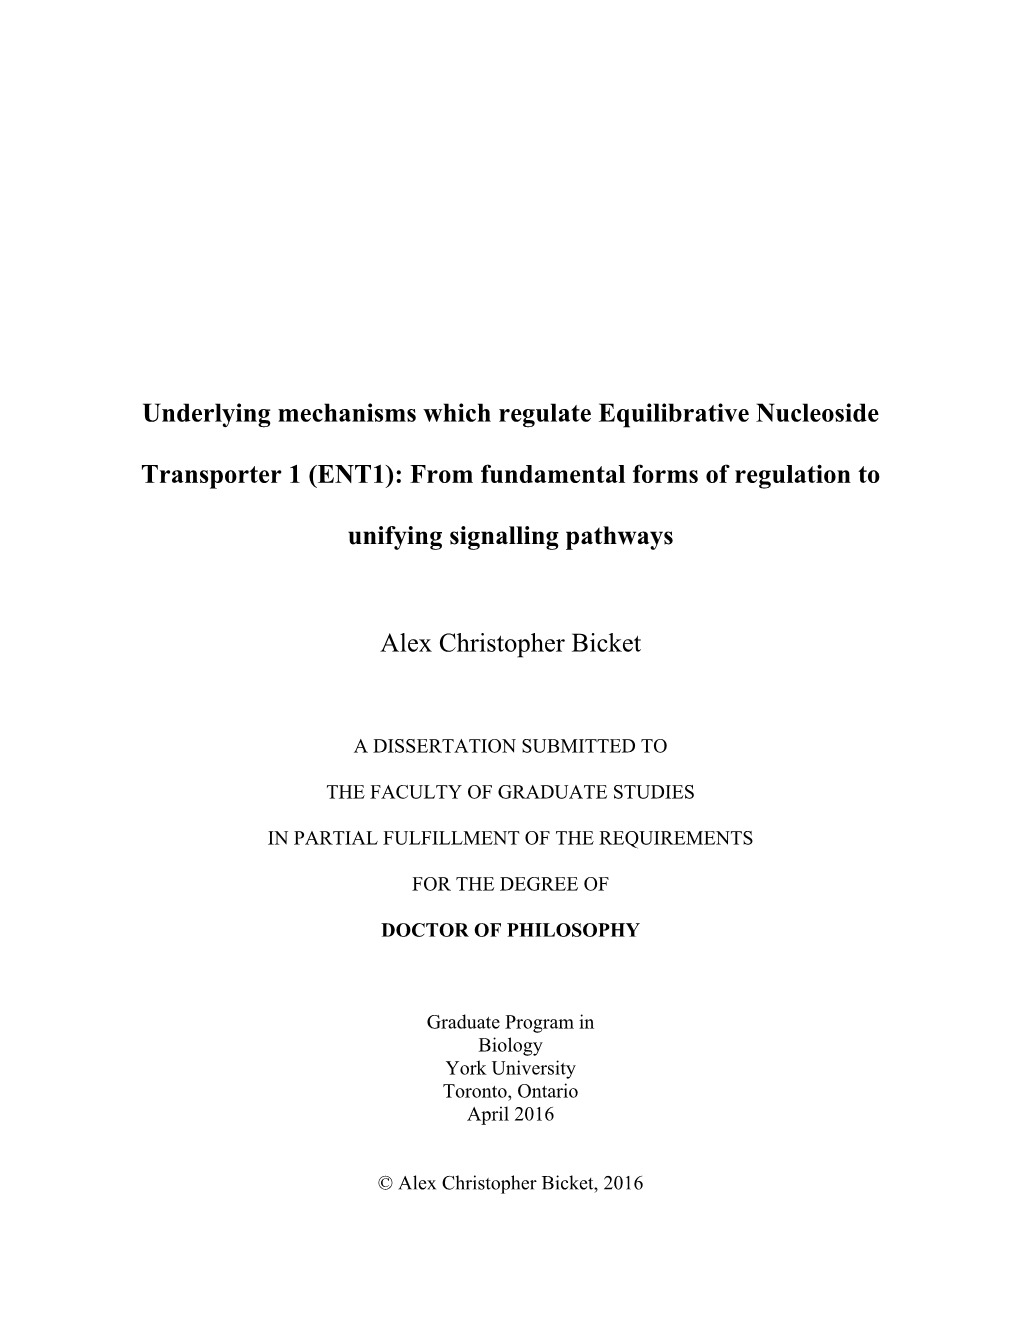 ENT1): from Fundamental Forms of Regulation To